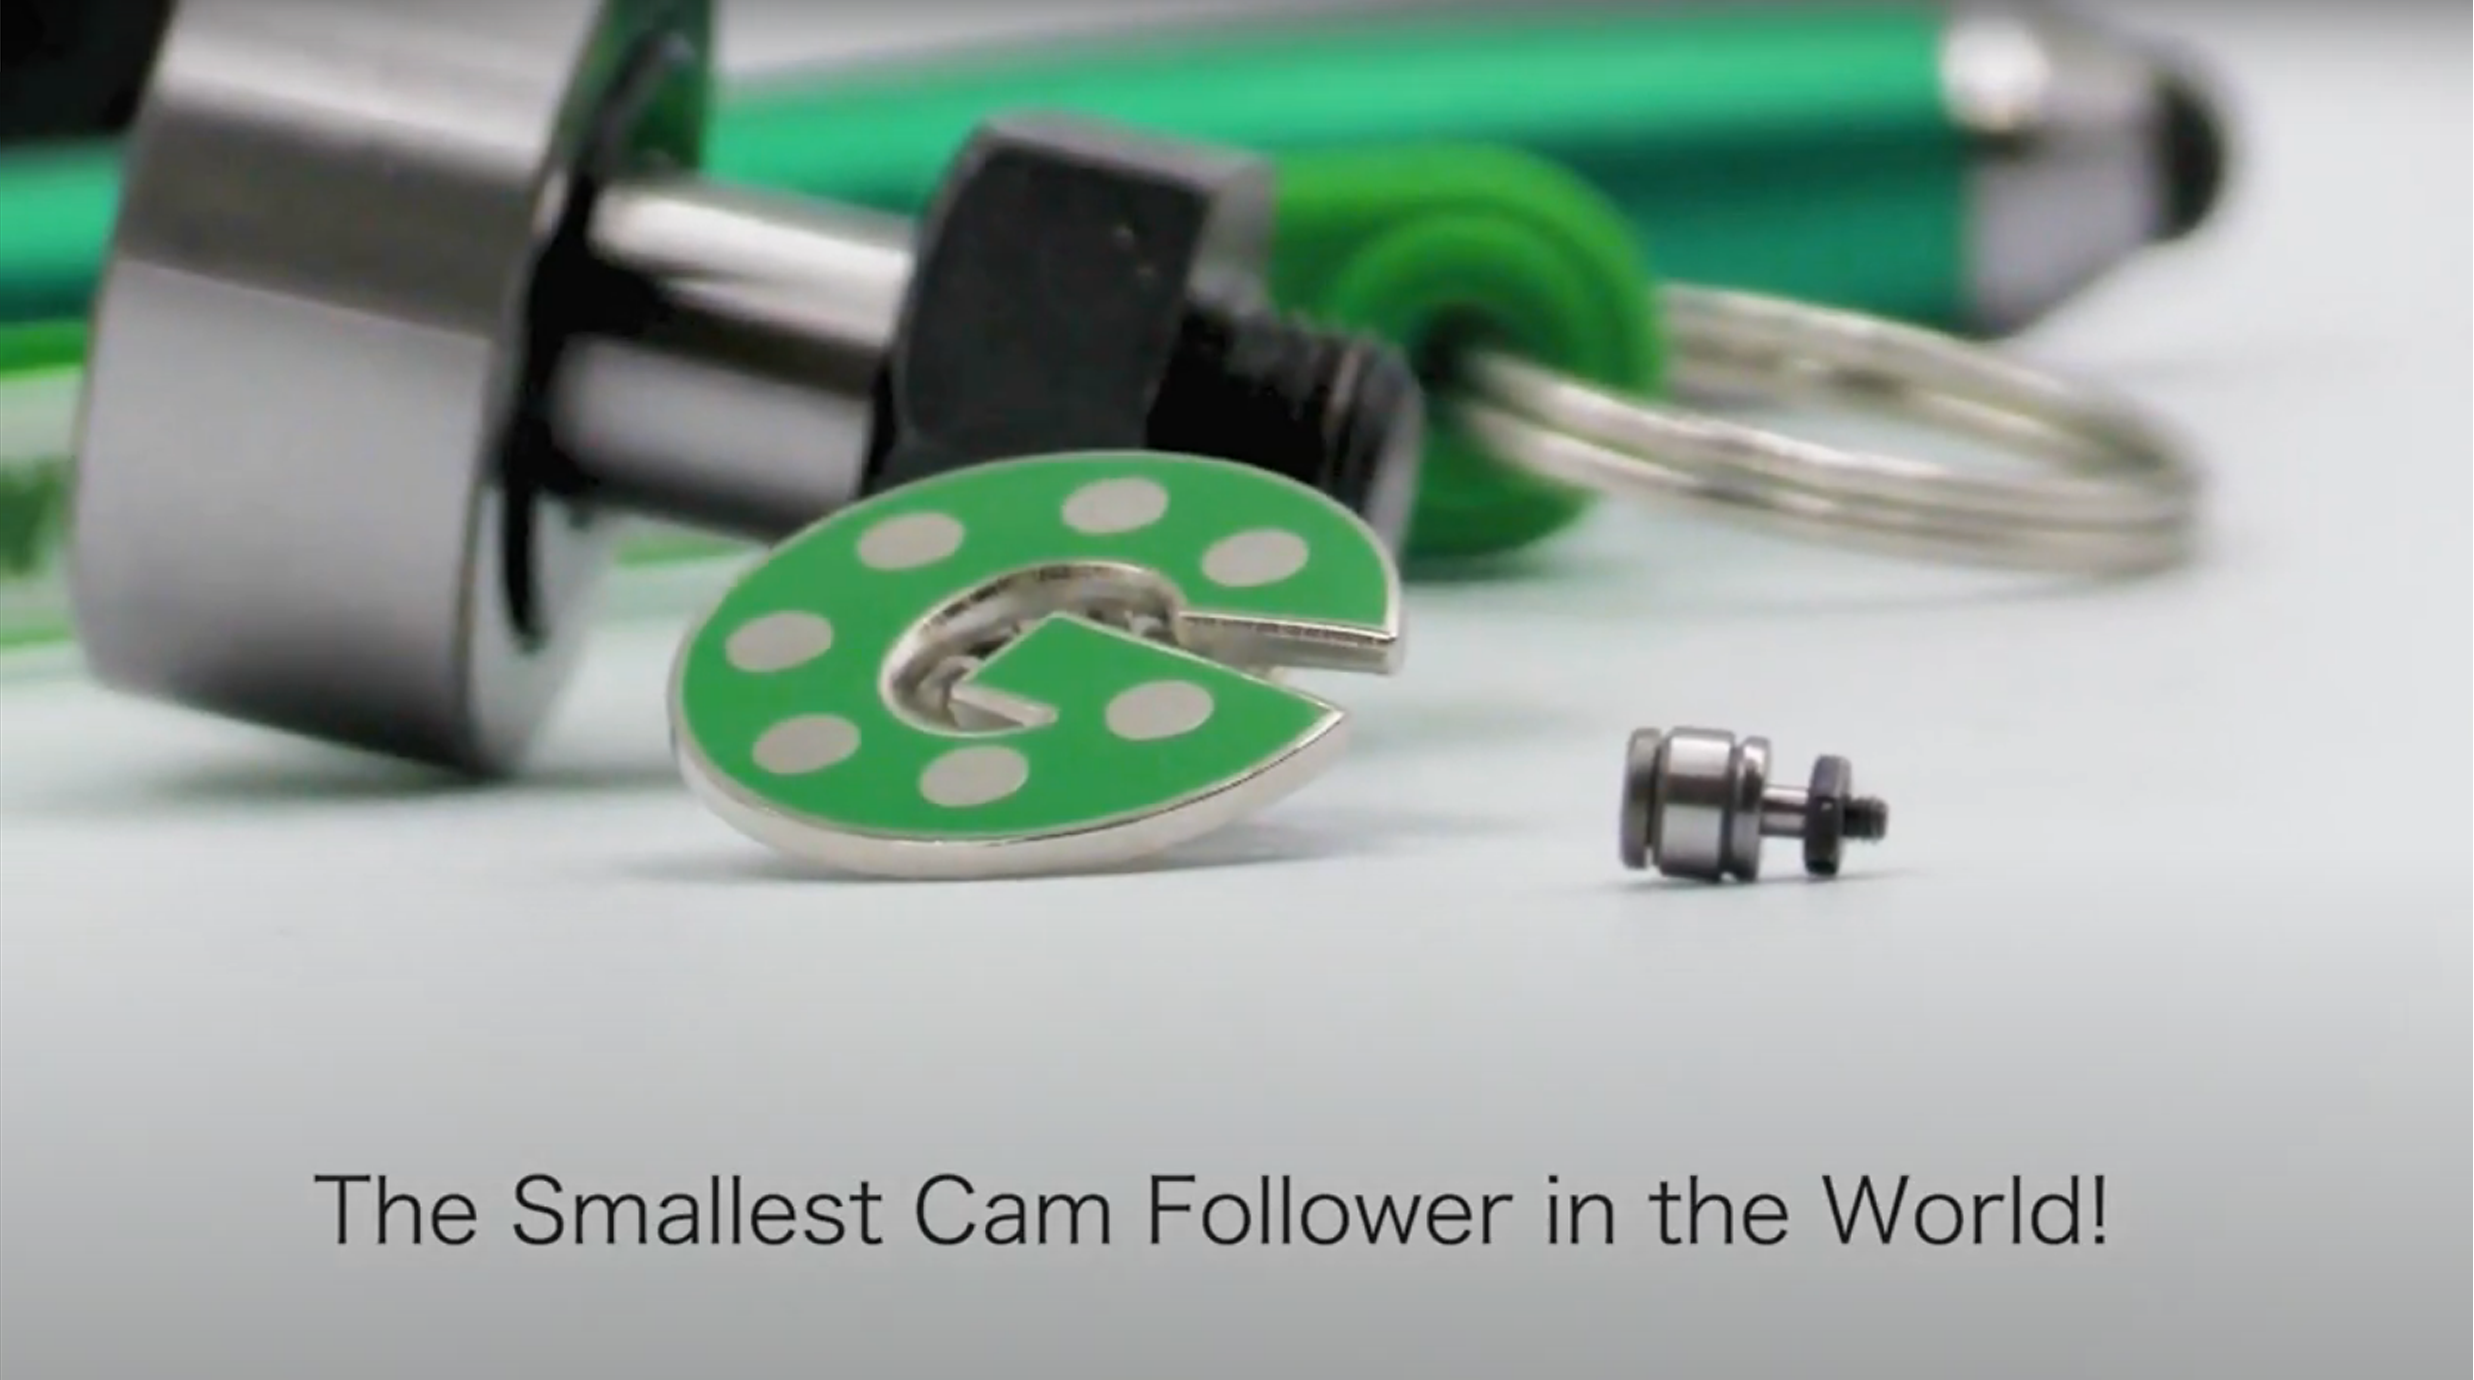 IKO's Smallest Cam Follower in the WORLD